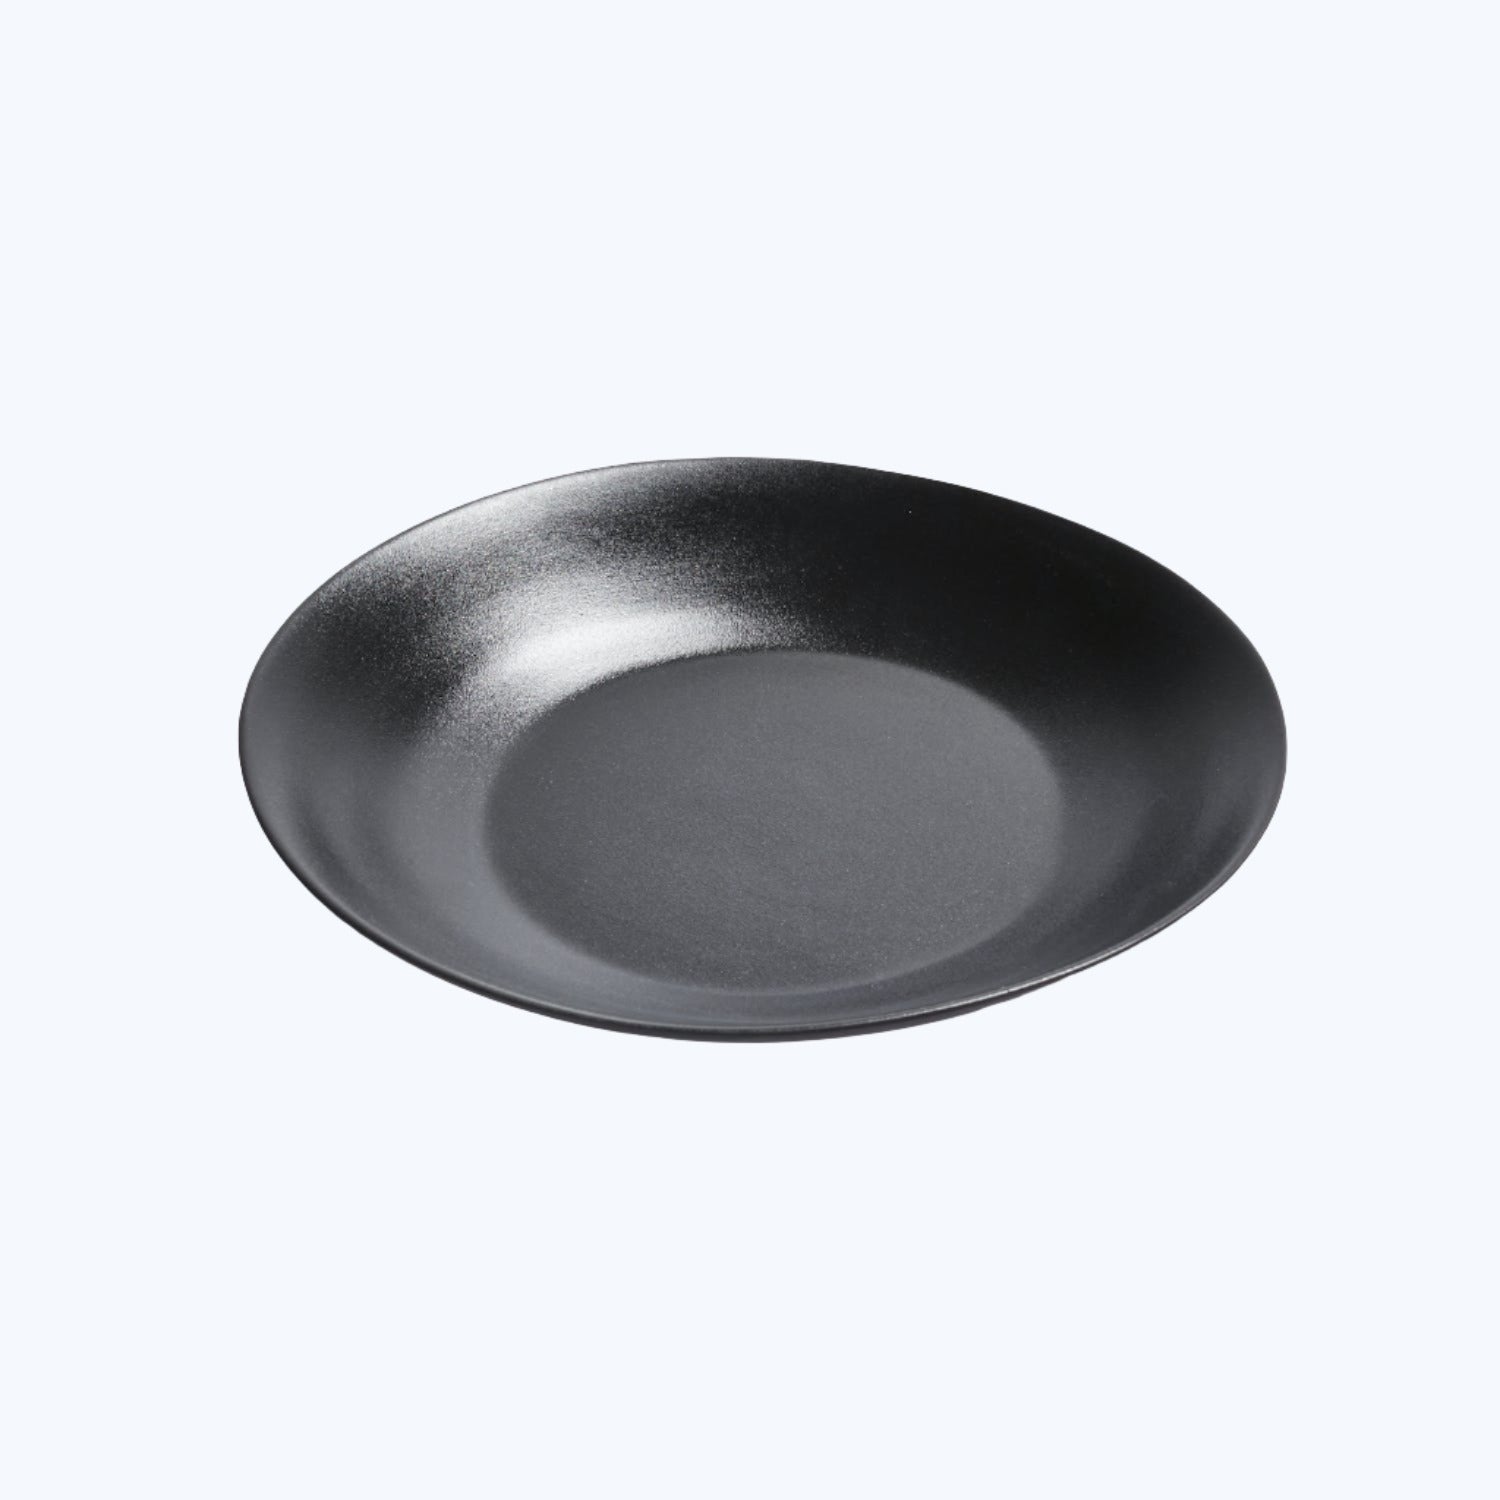 Plain black matte plate with shallow bowl shape and soft reflection.